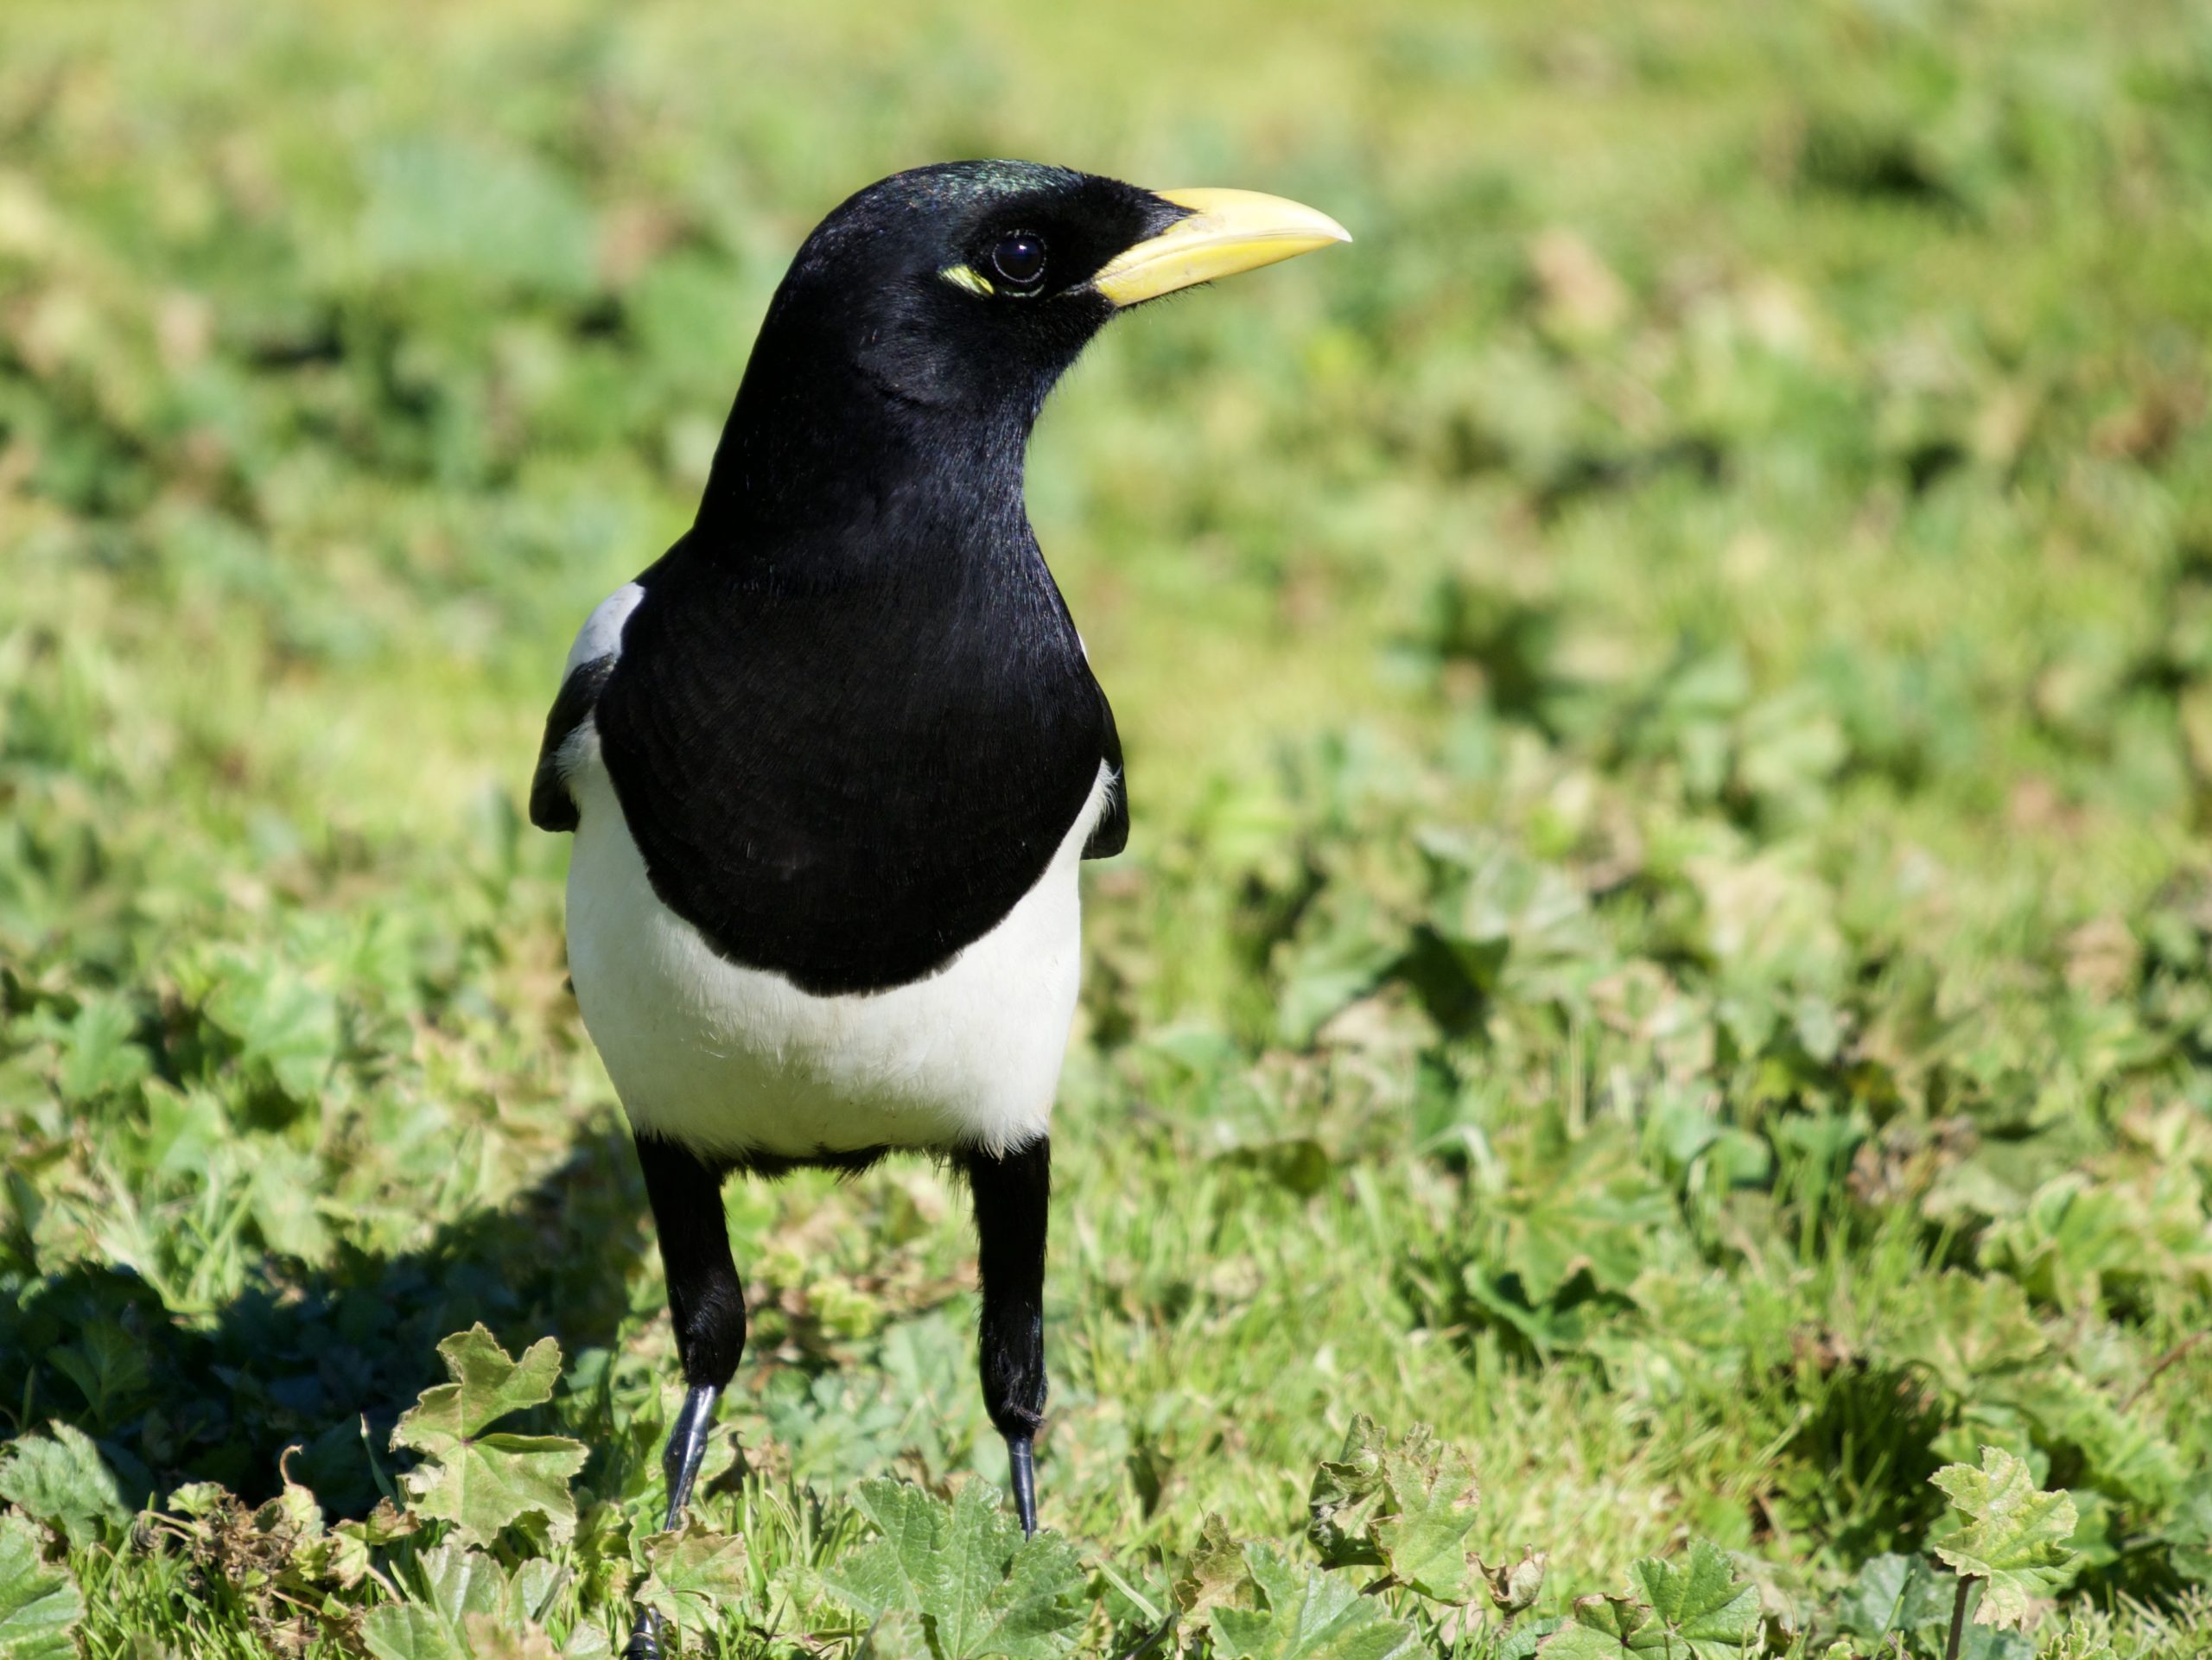 Yellow-Billed Magpie on Grass